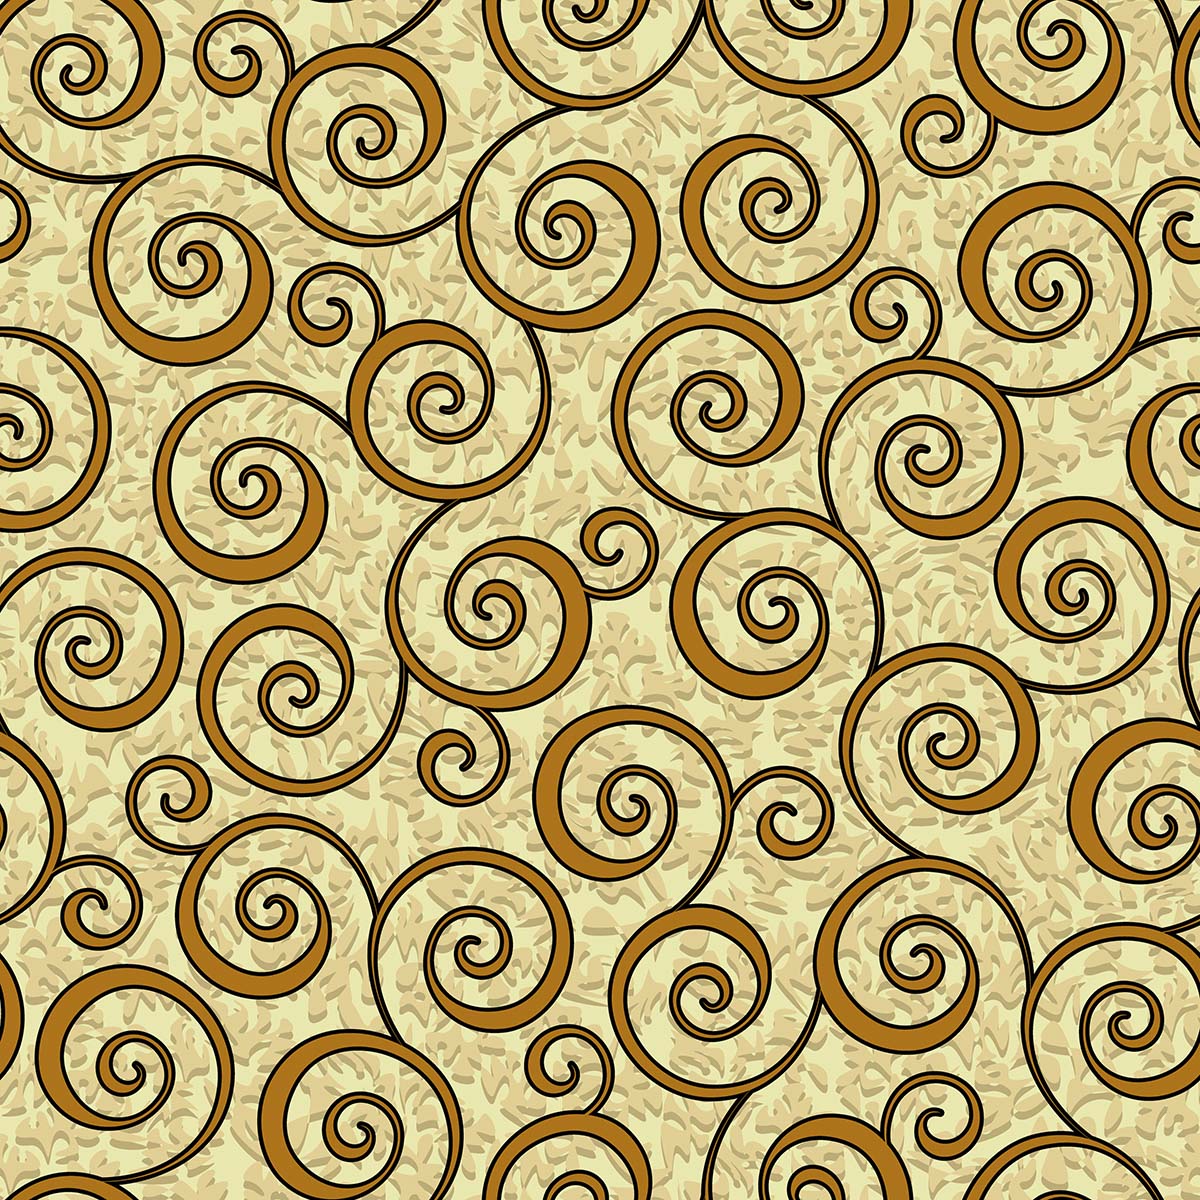 A pattern of spirals on a yellow background